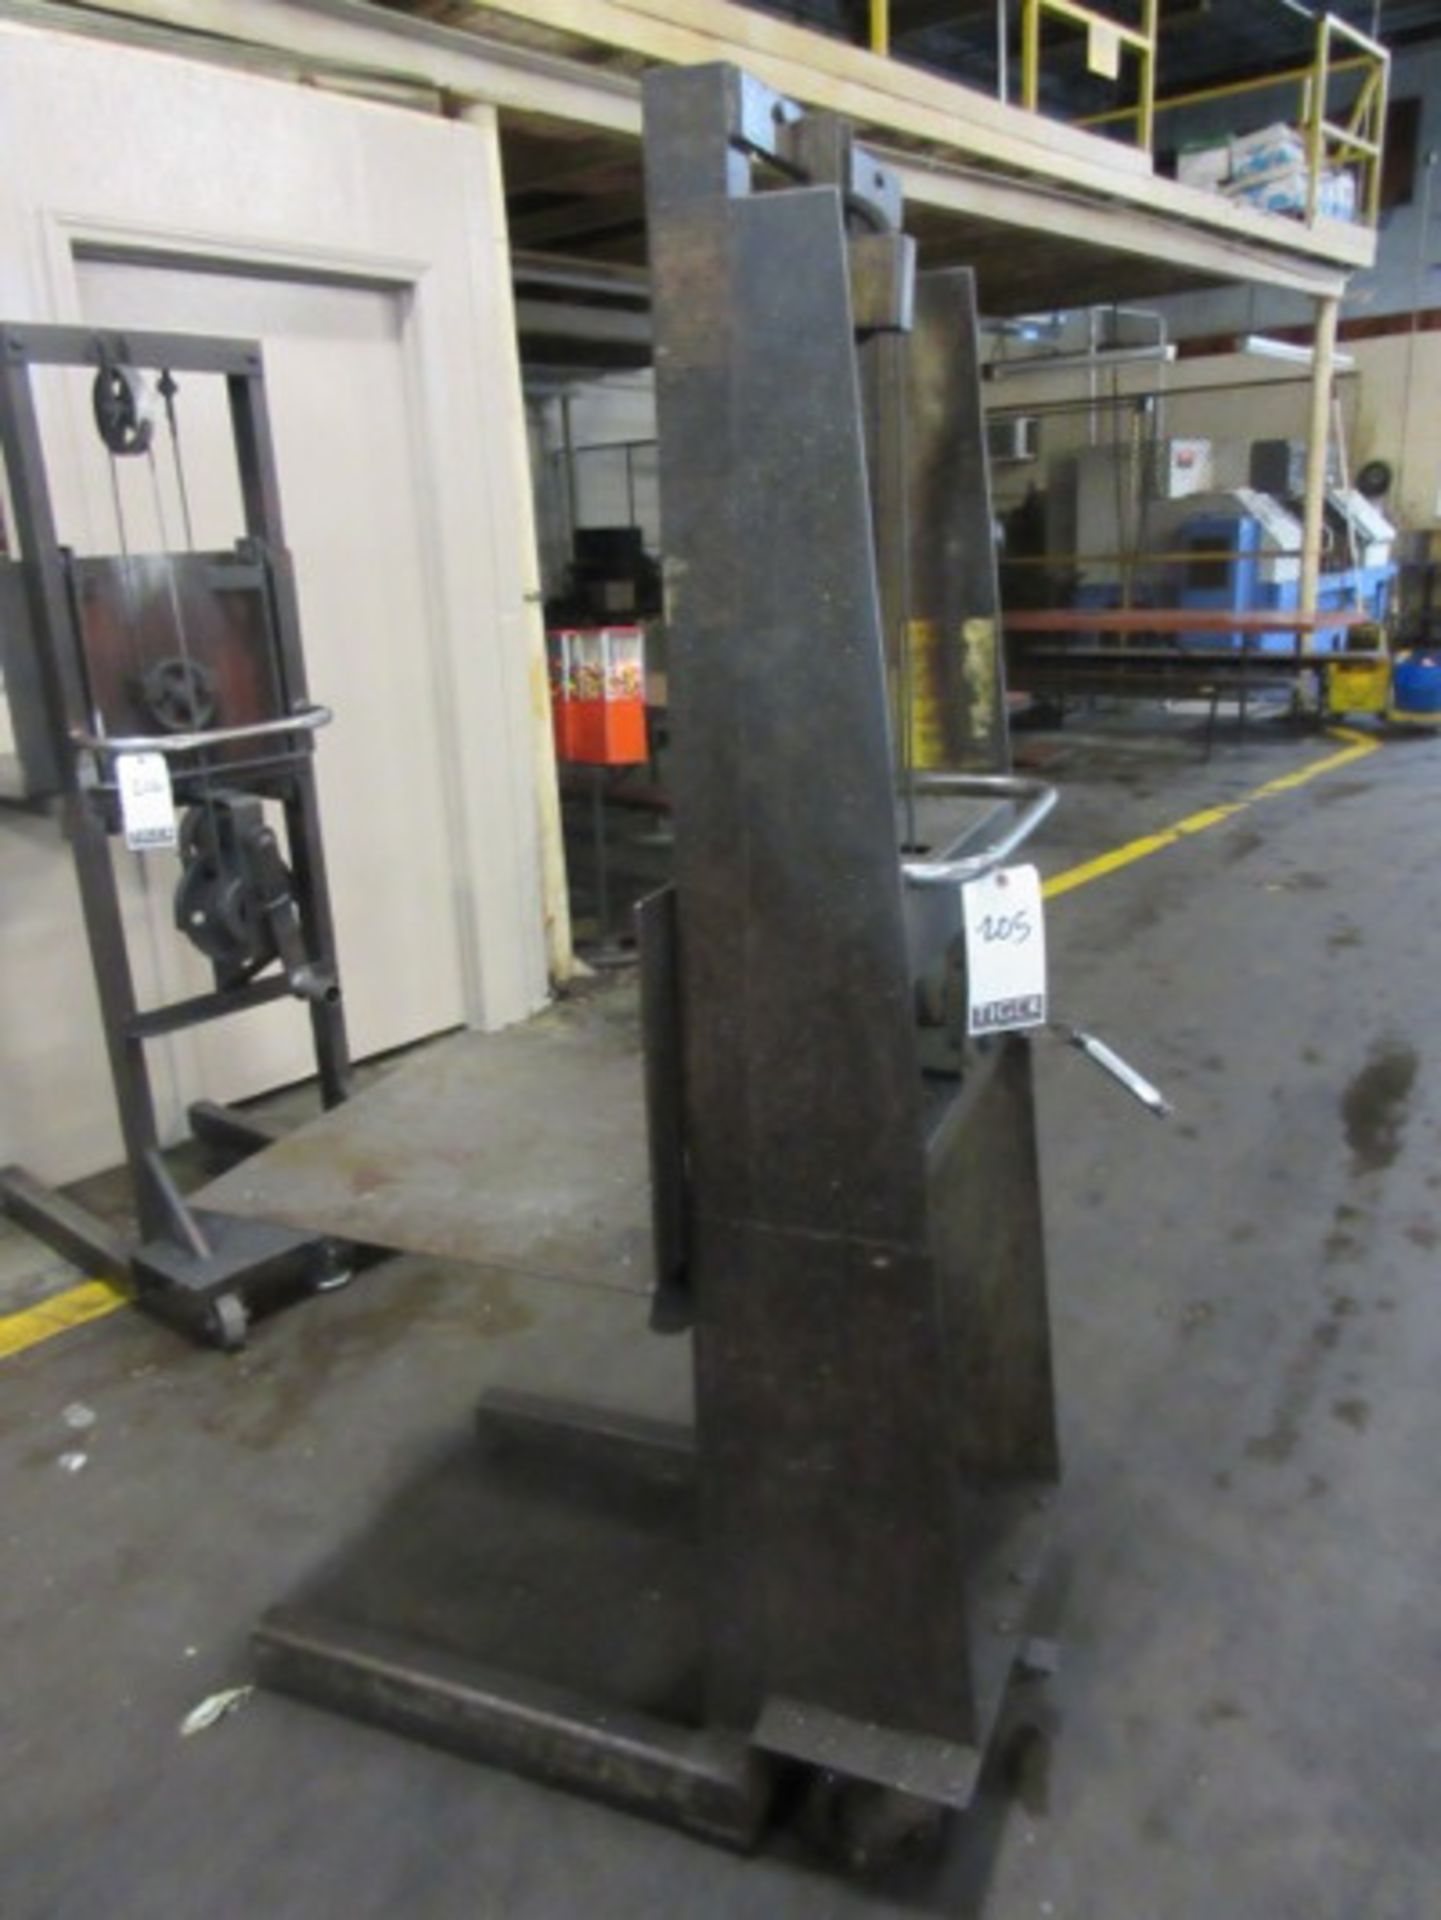 K-1550 Work Winch Table, Max Capacity 750lbs - Lot Location: Front Shop - Site Location: Sparta, TN